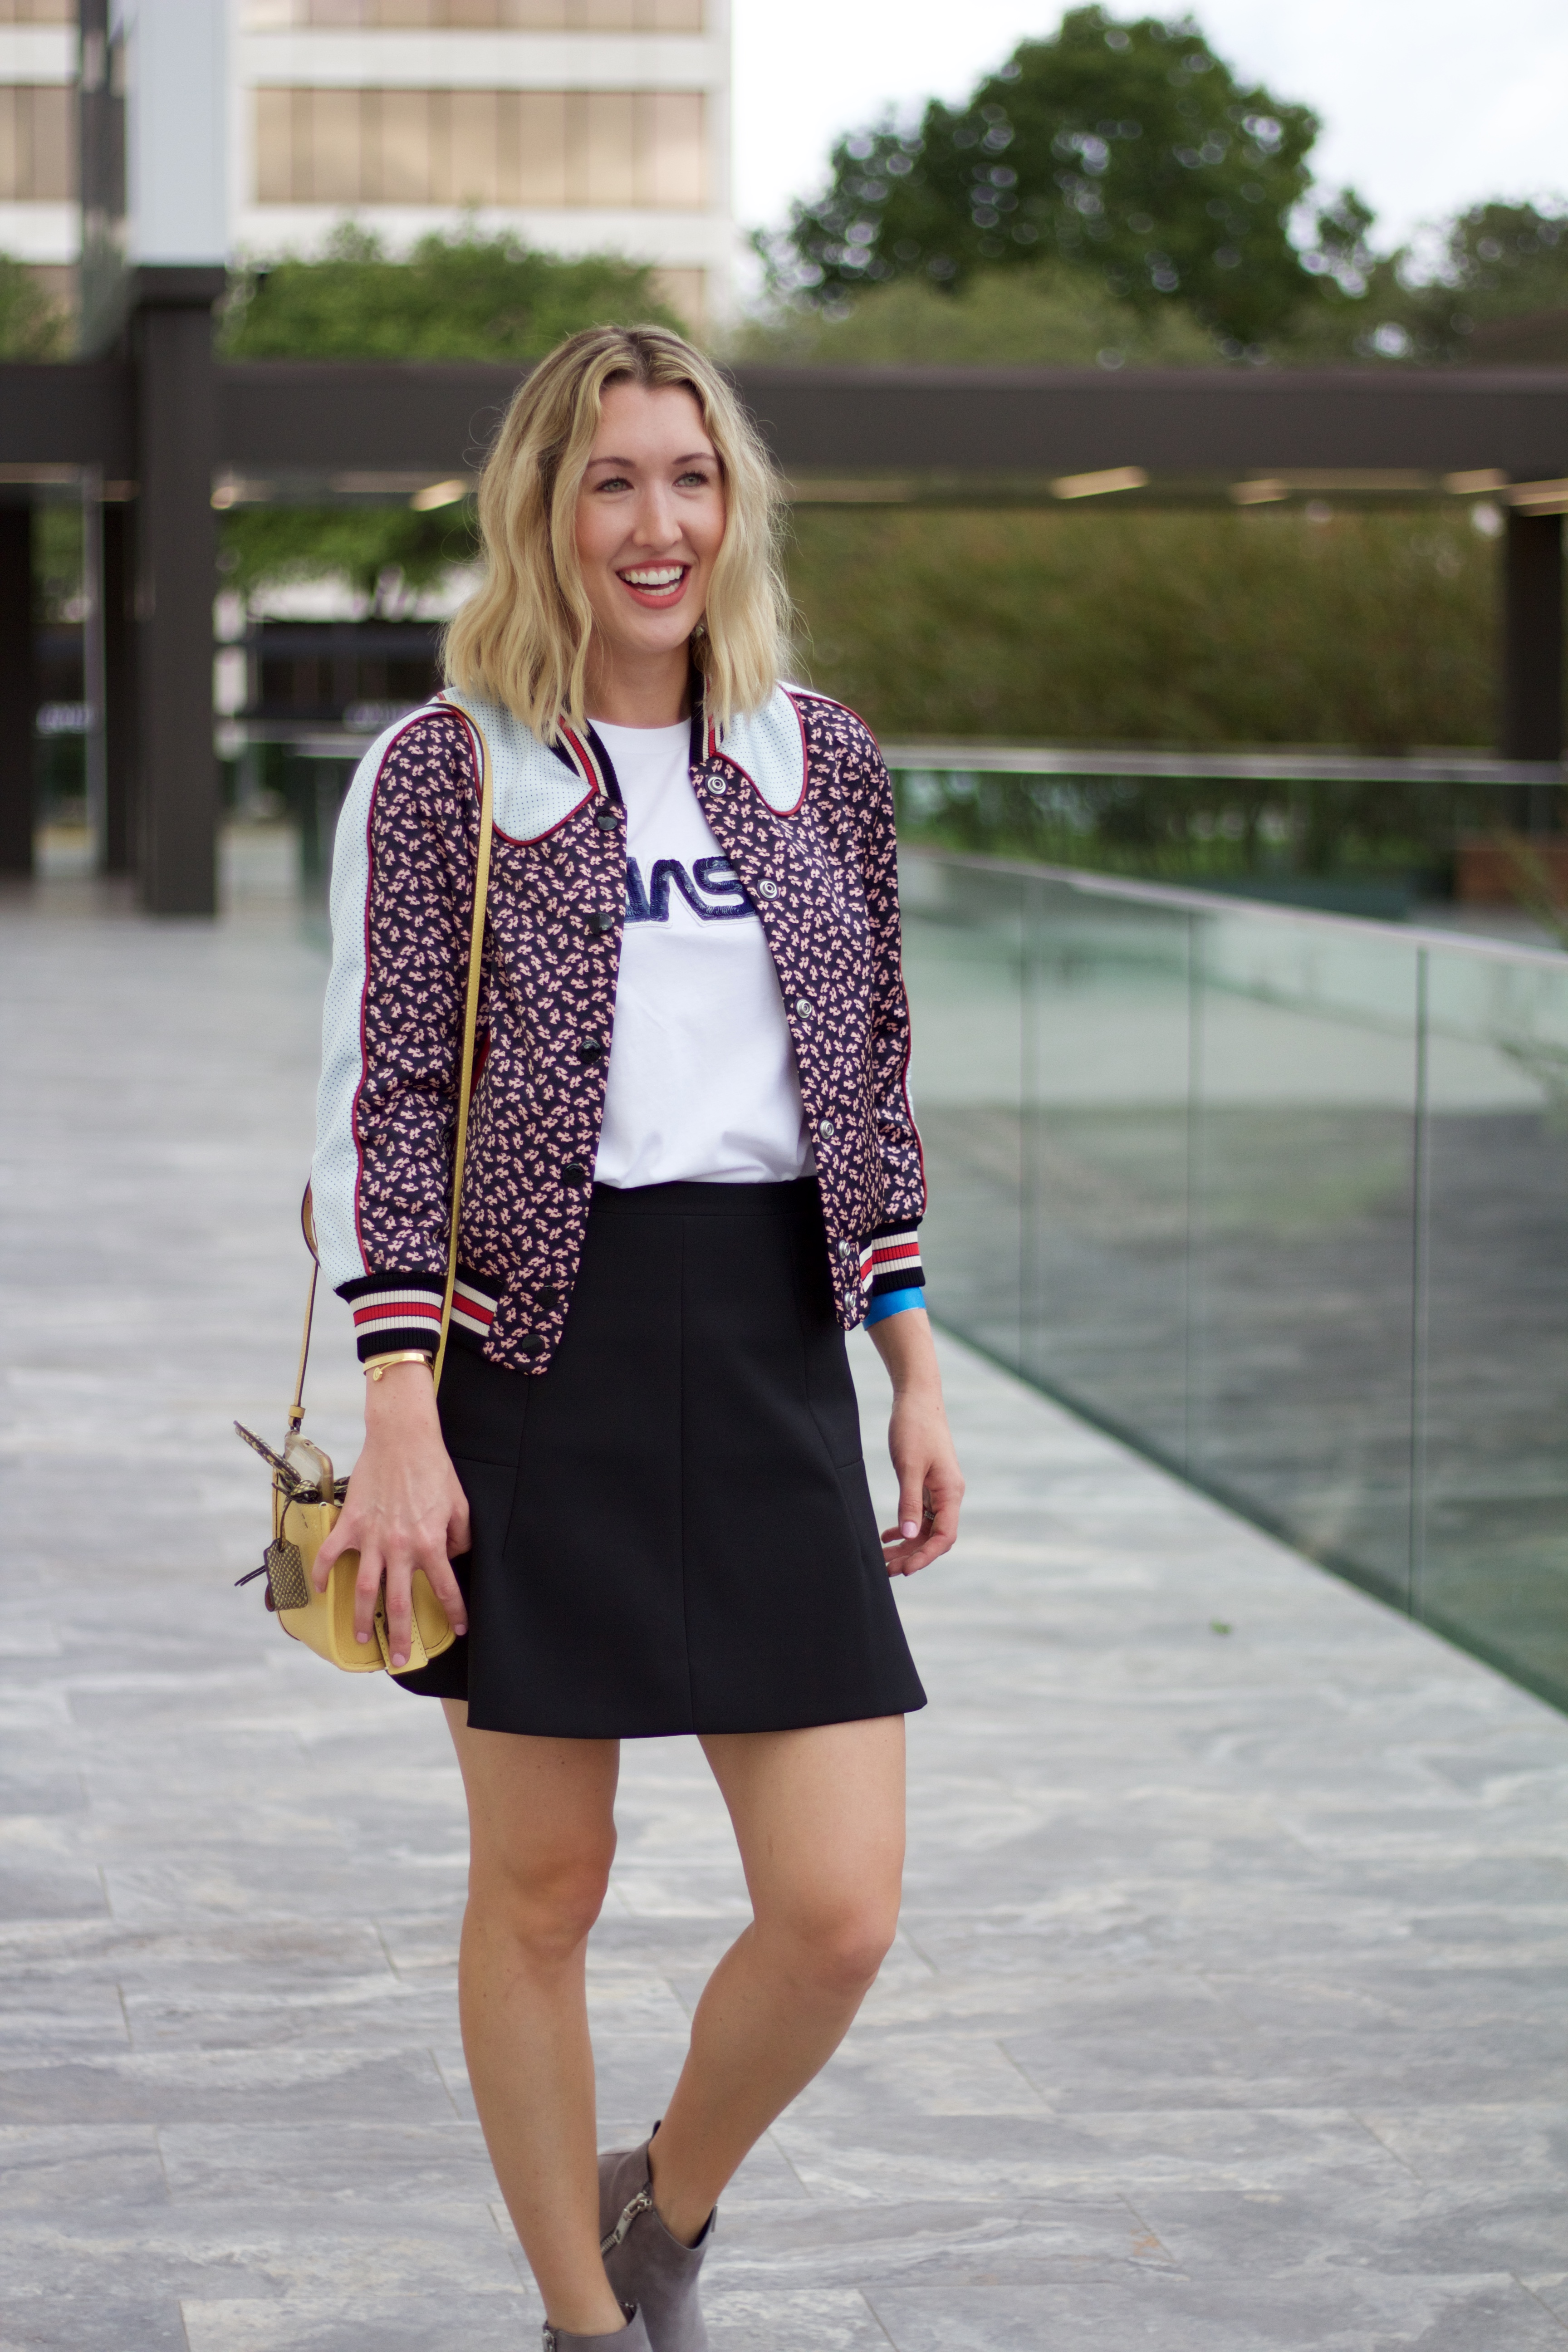 styling a jacket with skirt